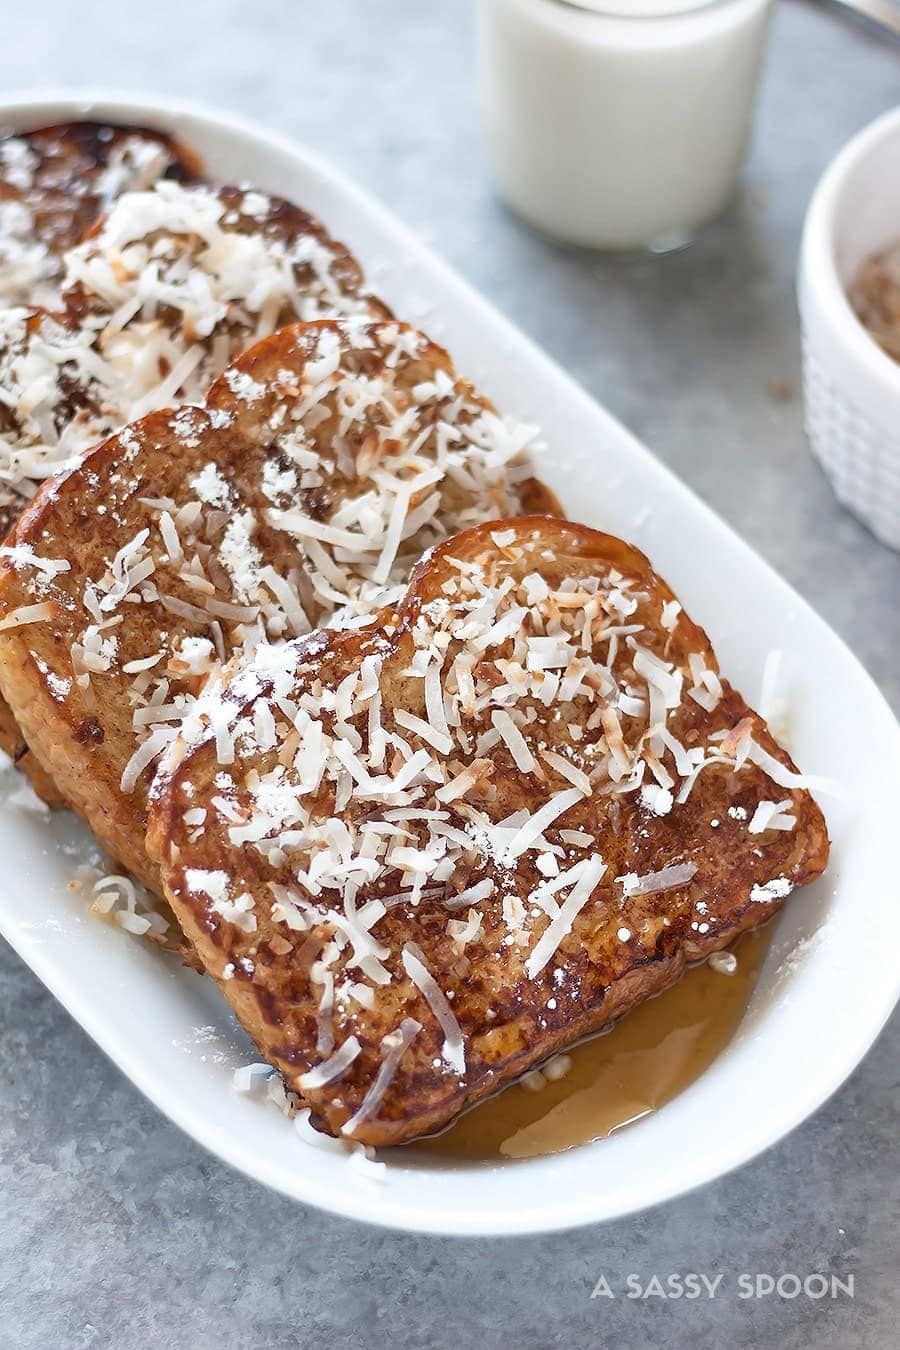 Dairy free French toast made with coconut milk, spiked with rum, and topped with toasted coconut flakes. Perfect for special occasions or Sunday brunch!